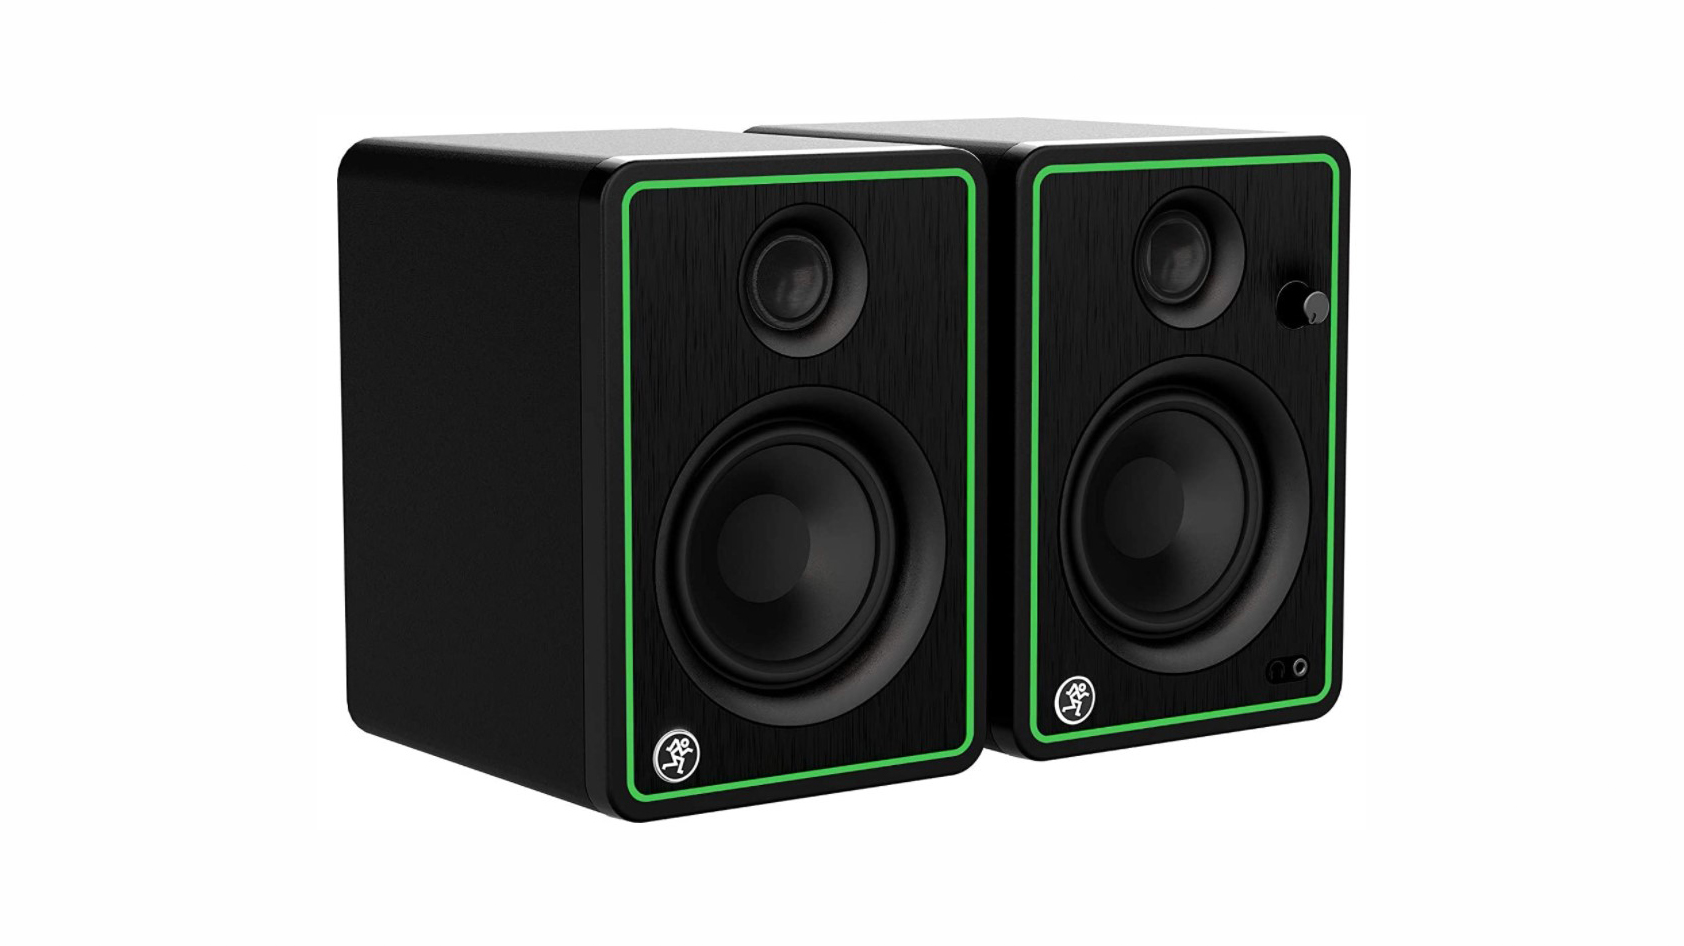 Product image of Mackie CR4-X studio monitors as a pair from the front.